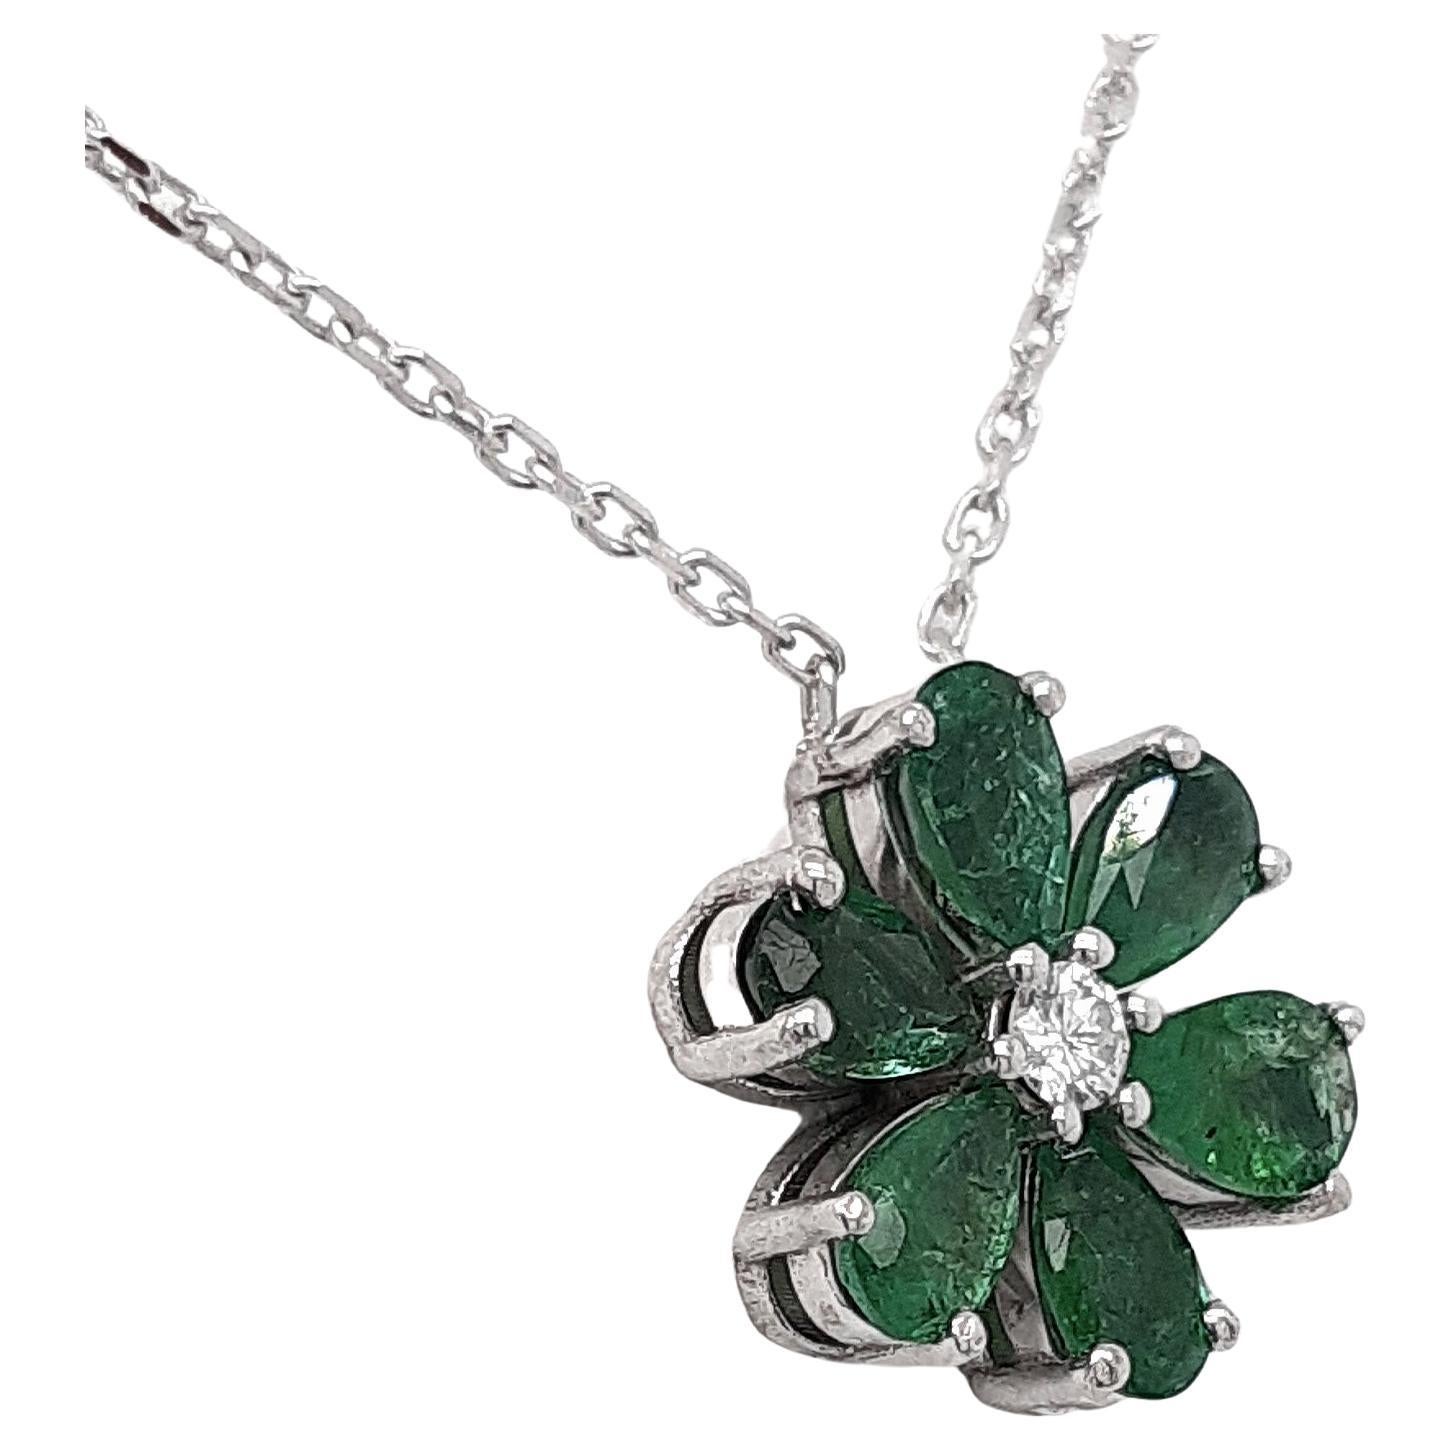 FOR U.S. BUYERS NO VAT 

In this breathtaking 14kt white gold pendant, 6 gorgeous green pear shape mixed cut emeralds totaling 1.30 are surrounding one round brilliant cut white colorless diamond weighing 0.06 carats in such a way that they are